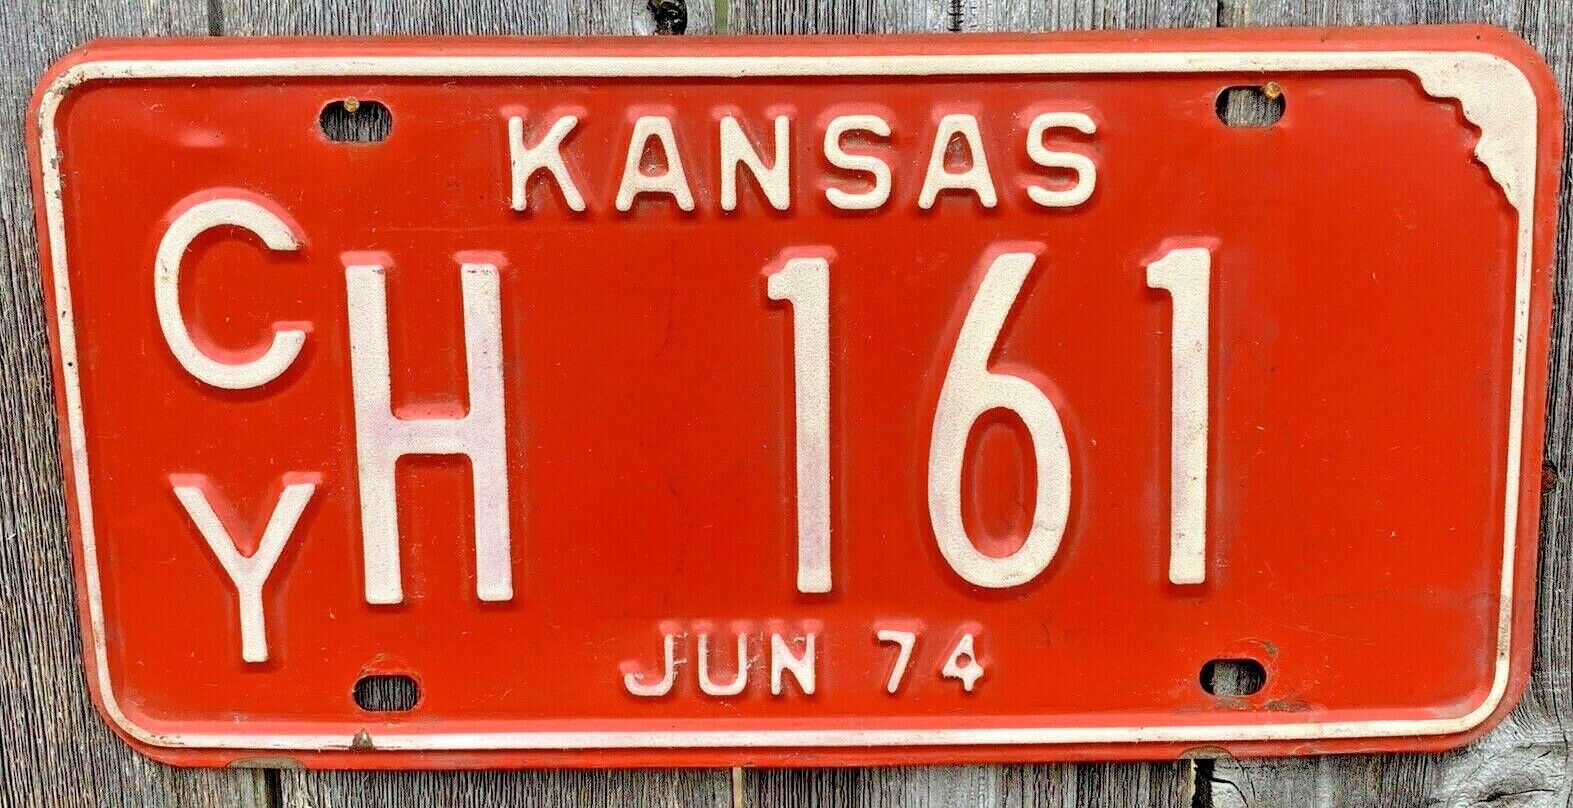 1974 KANSAS LICENSE PLATE #CYH161, BRIGHT RED AND WHITE